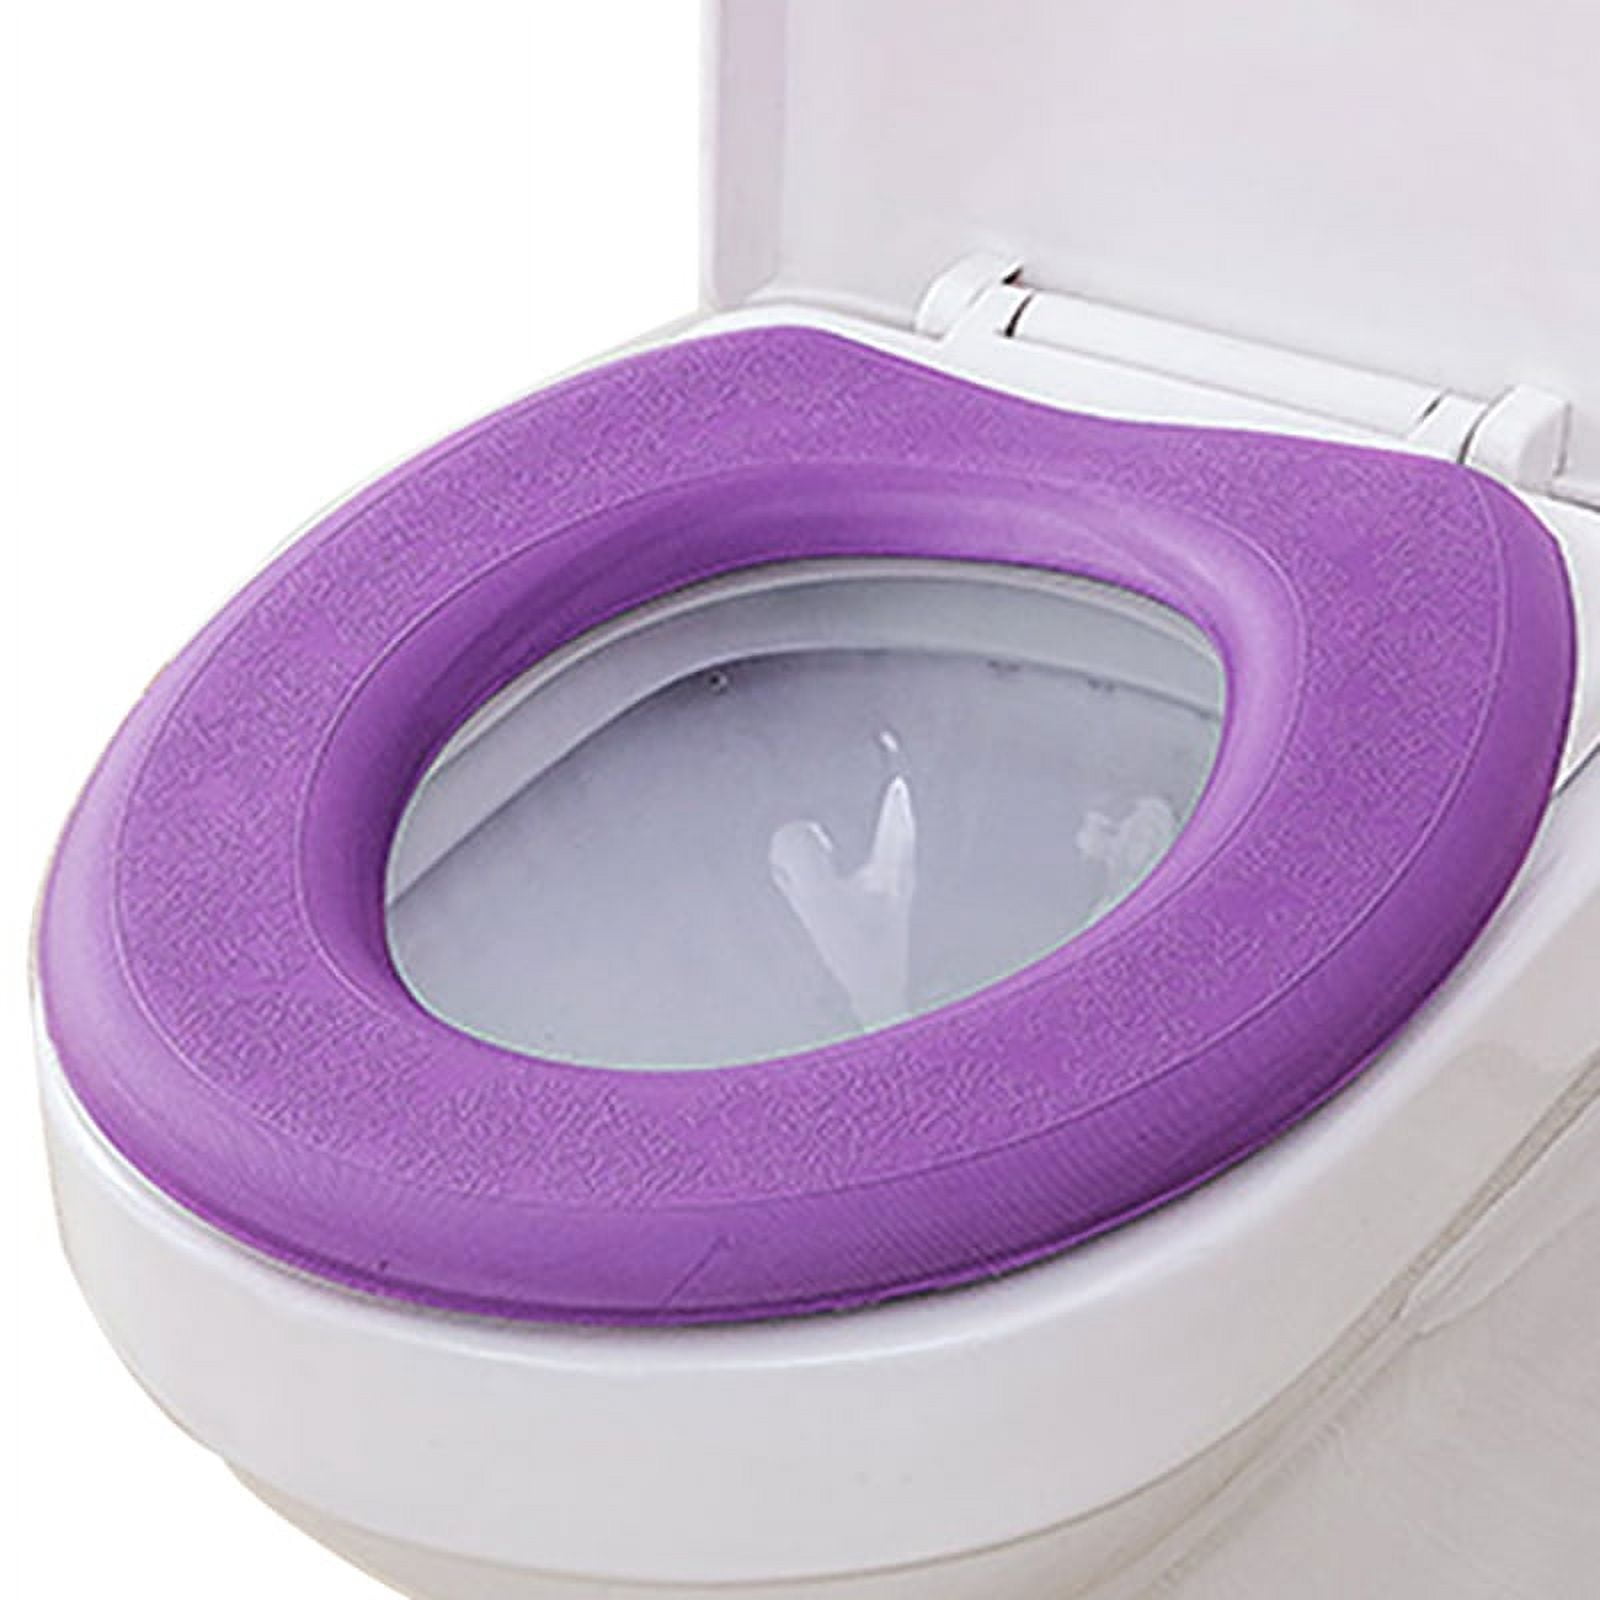 Toilet Seat Cushion Cover Pad Sponge Gel Memory Foam Waterproof Washable  Extra Large 3.94 Width Individual Package High Quality Ws3